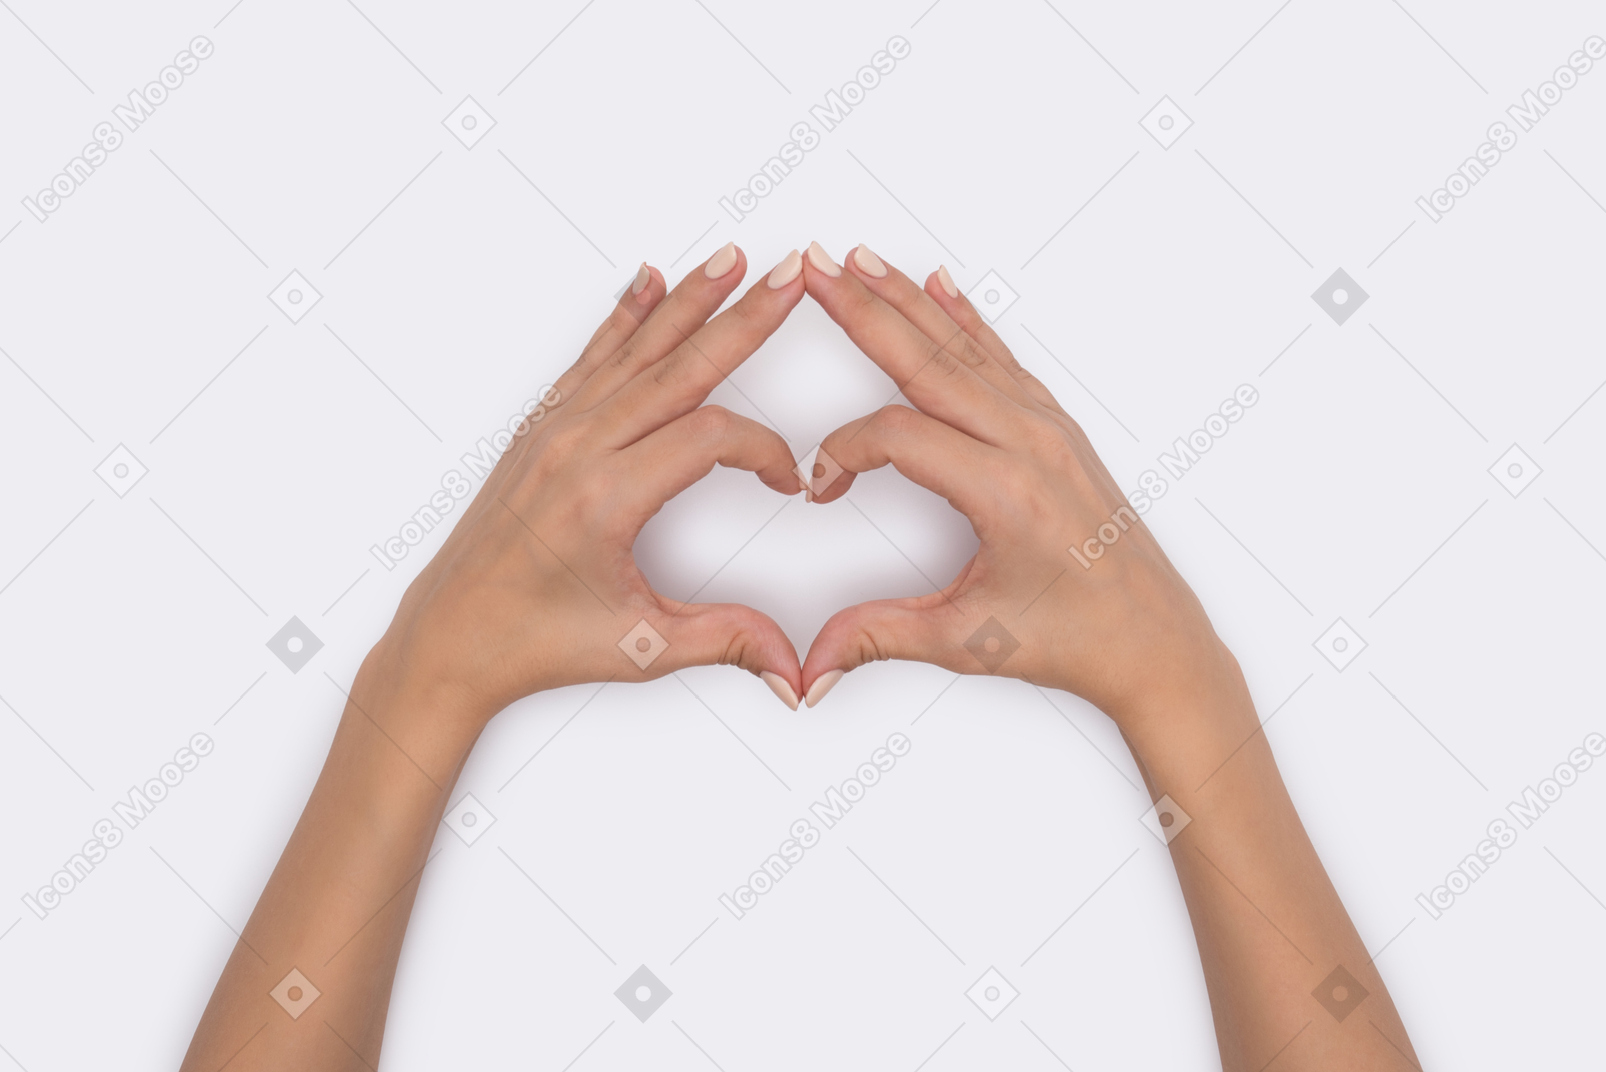 Heart shape made by fingers